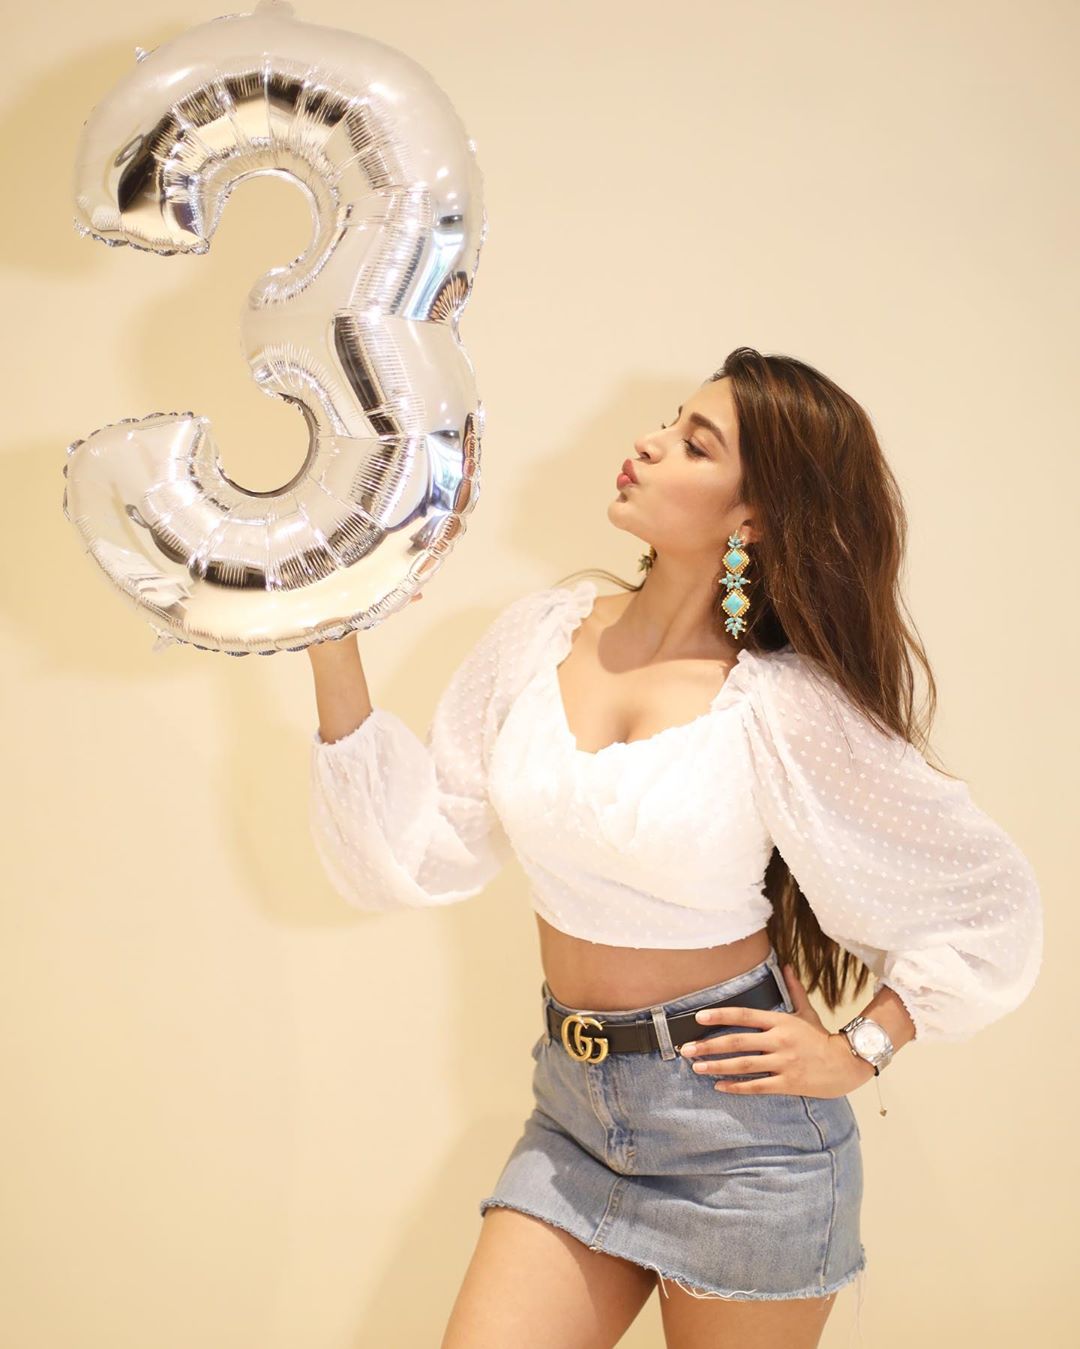 Niddhi Agerwal thanks her fans for 3 Million followers